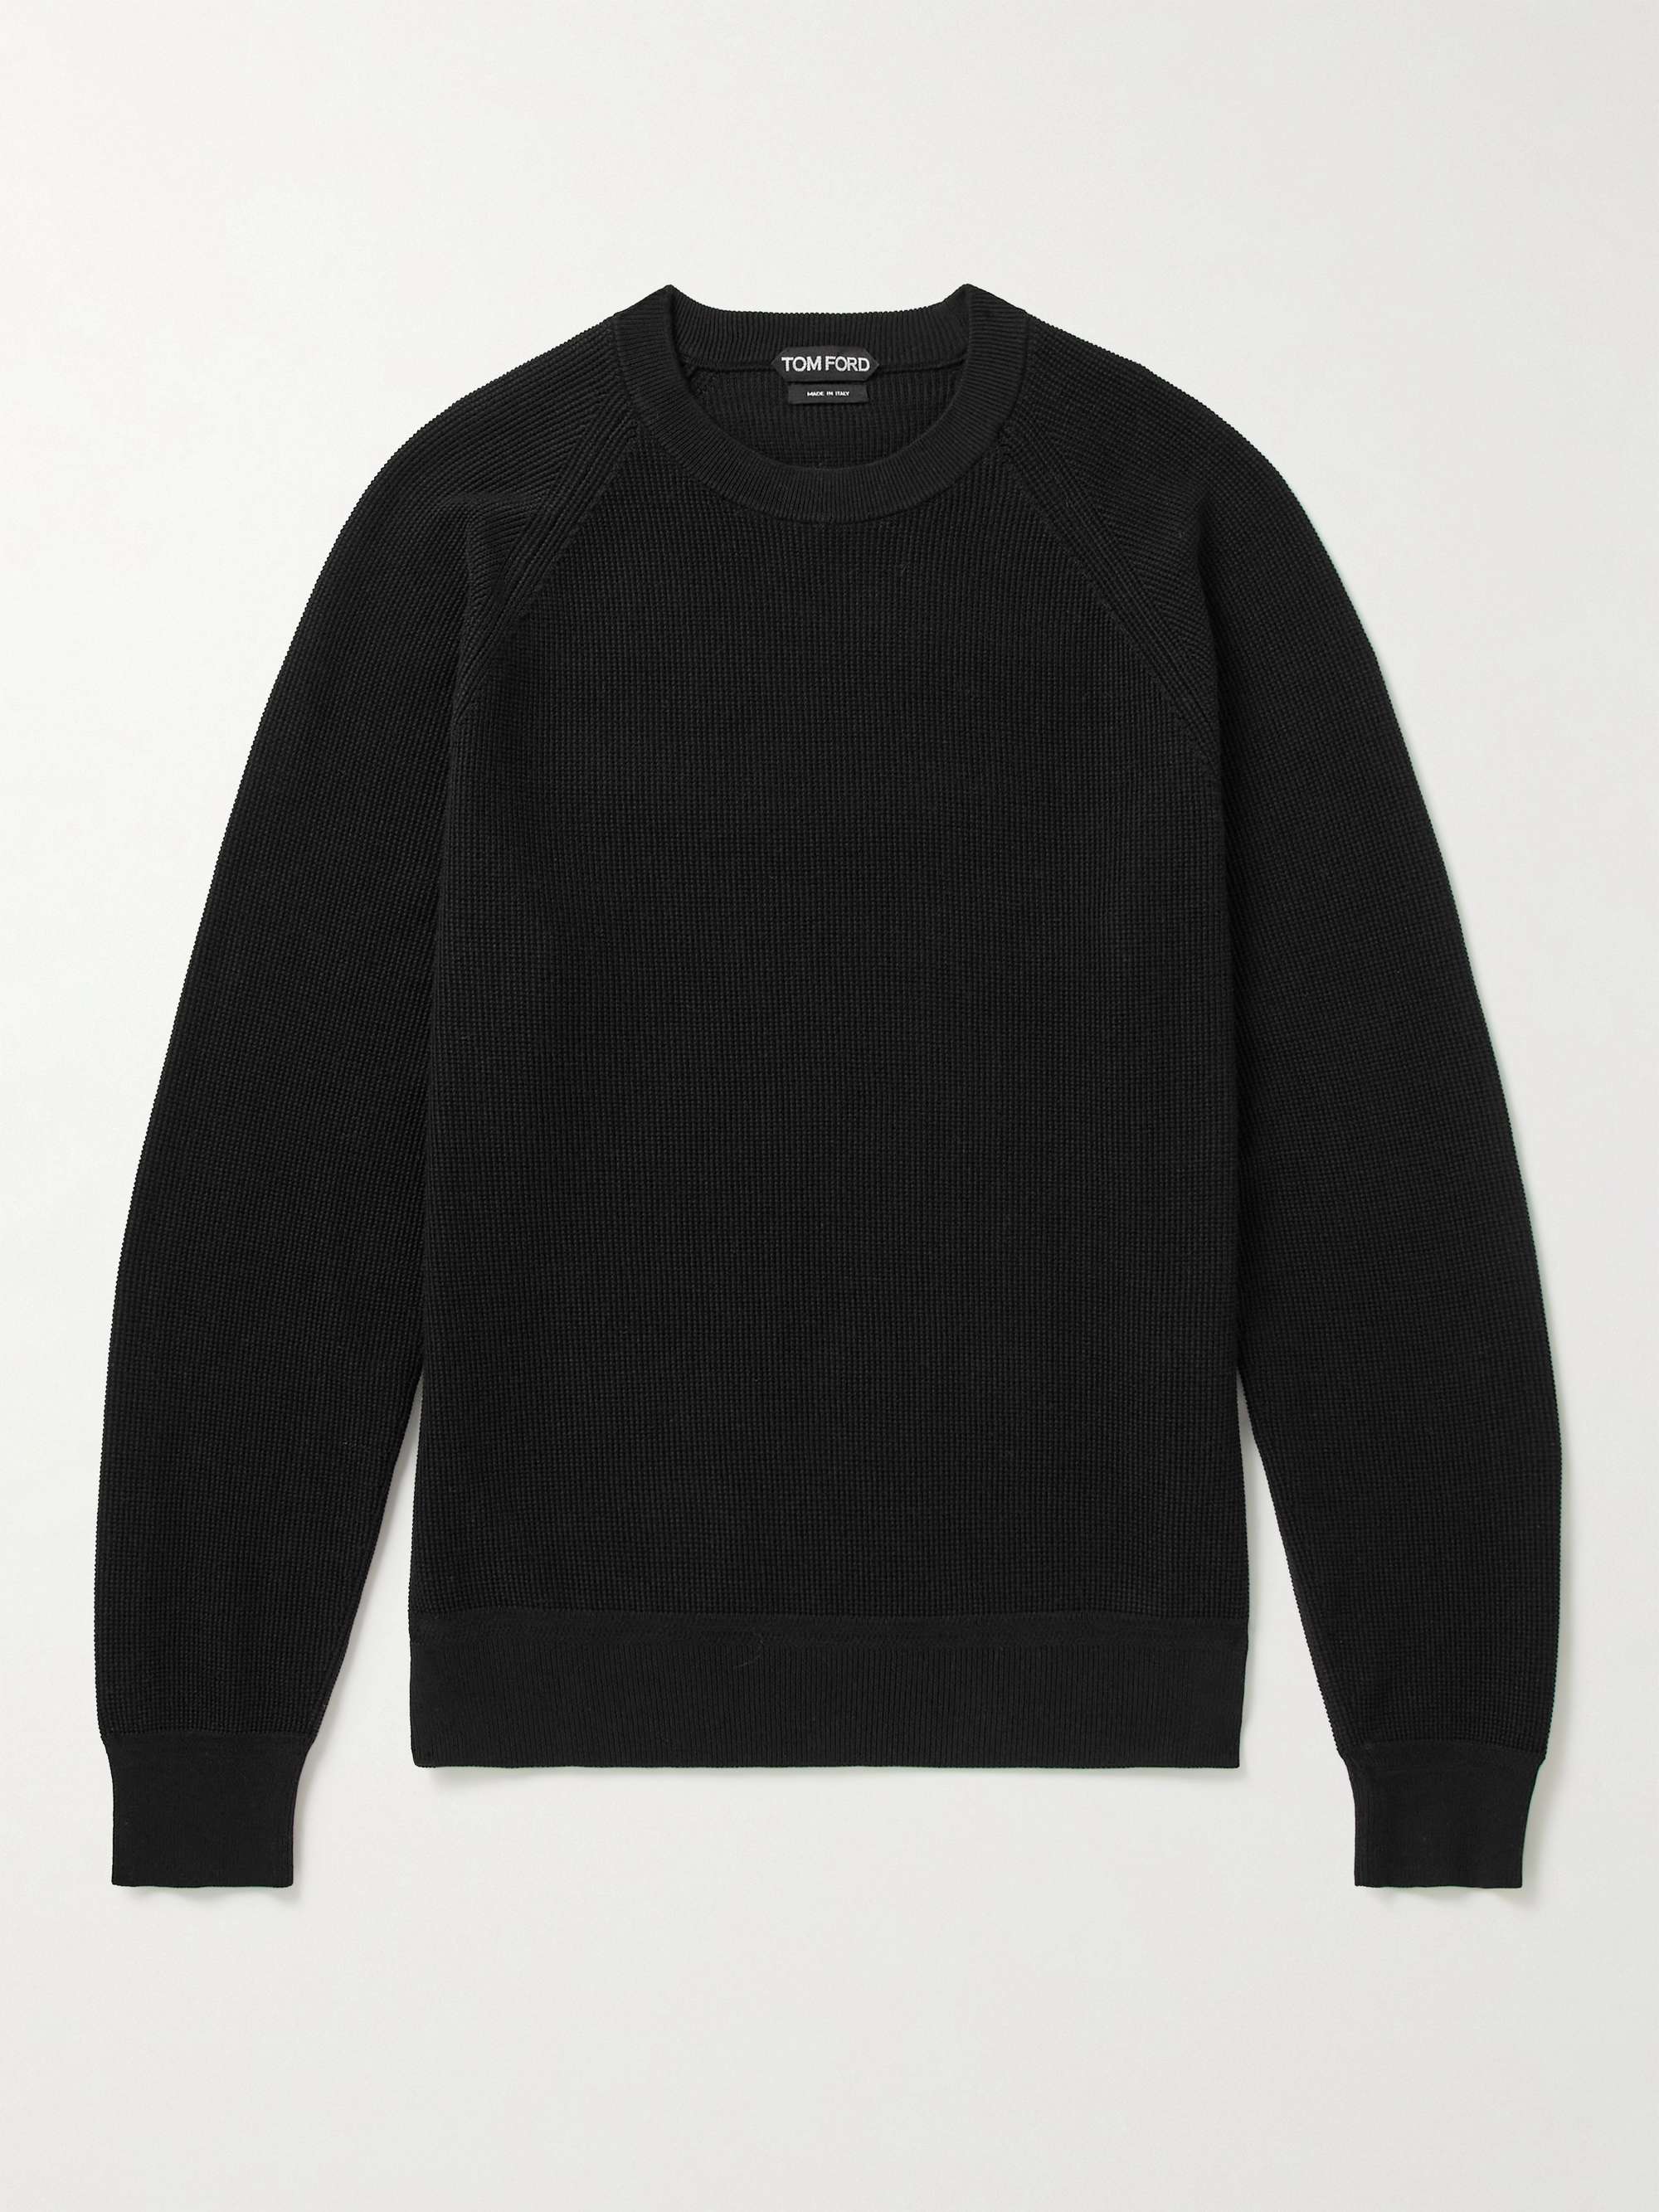 TOM FORD Ribbed Cotton and Silk-Blend Sweater